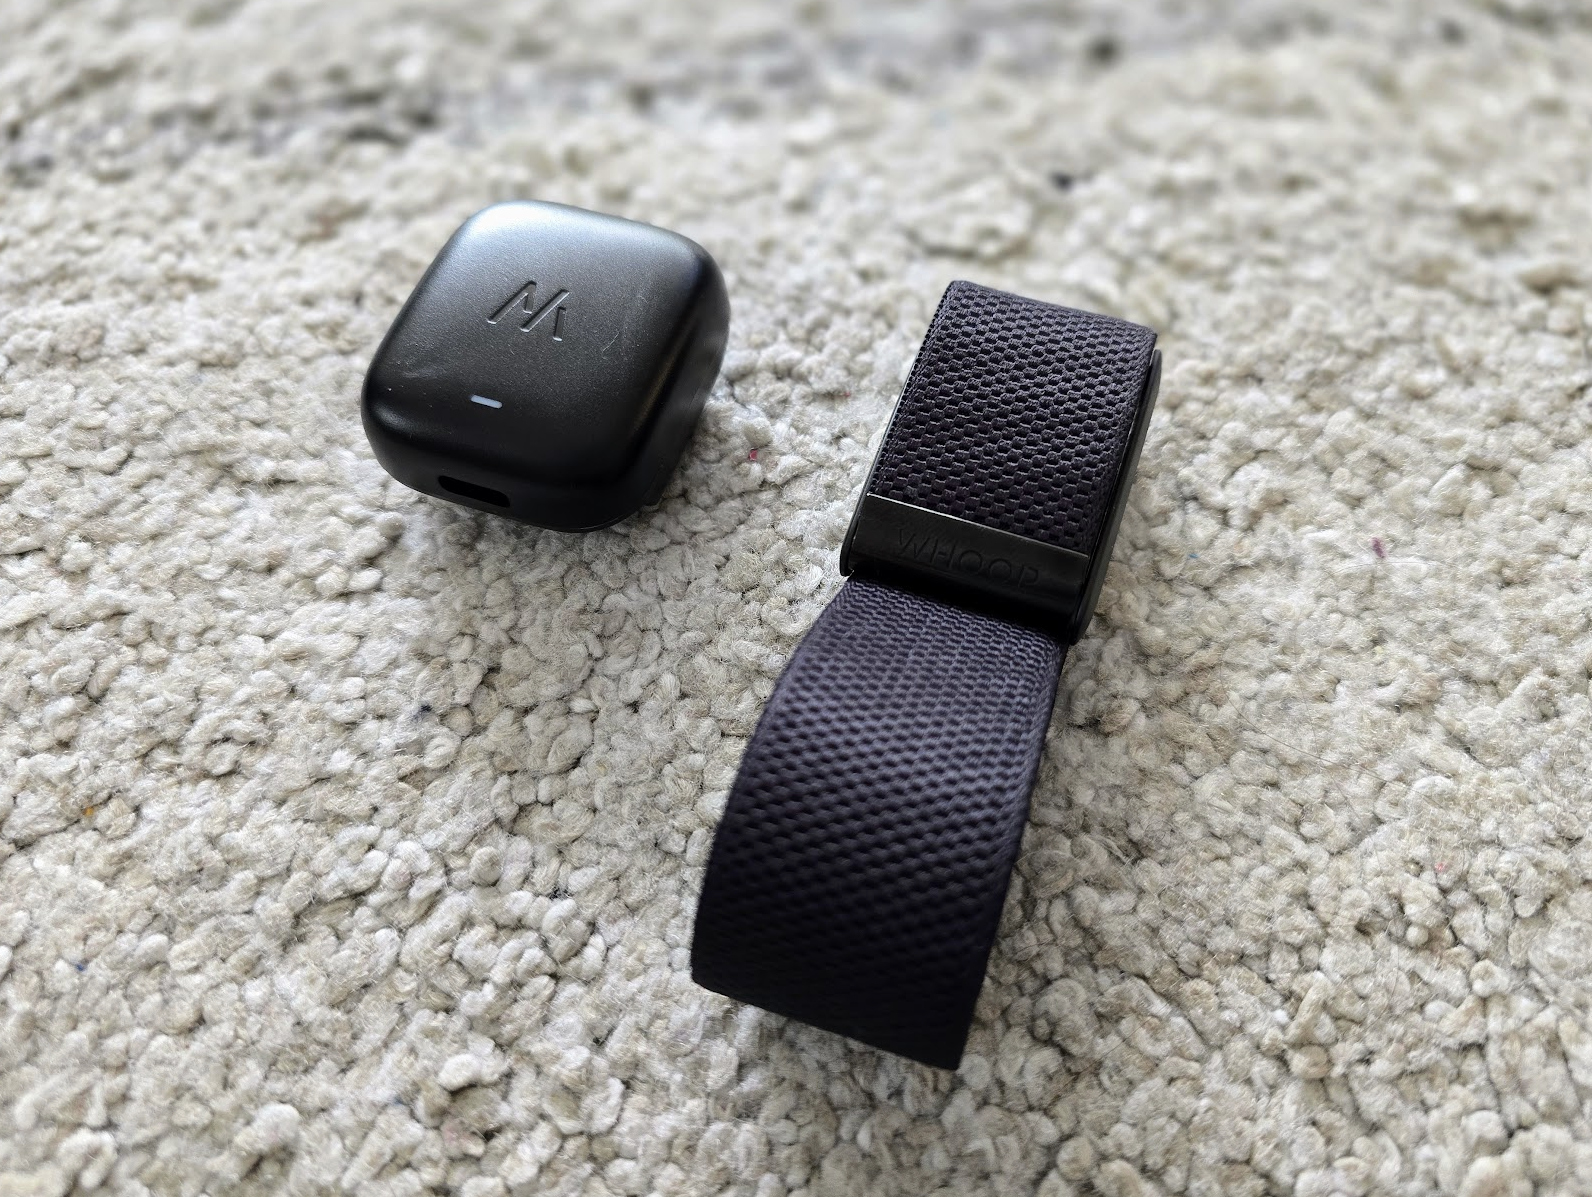 Two weeks with the Whoop activity and fitness band